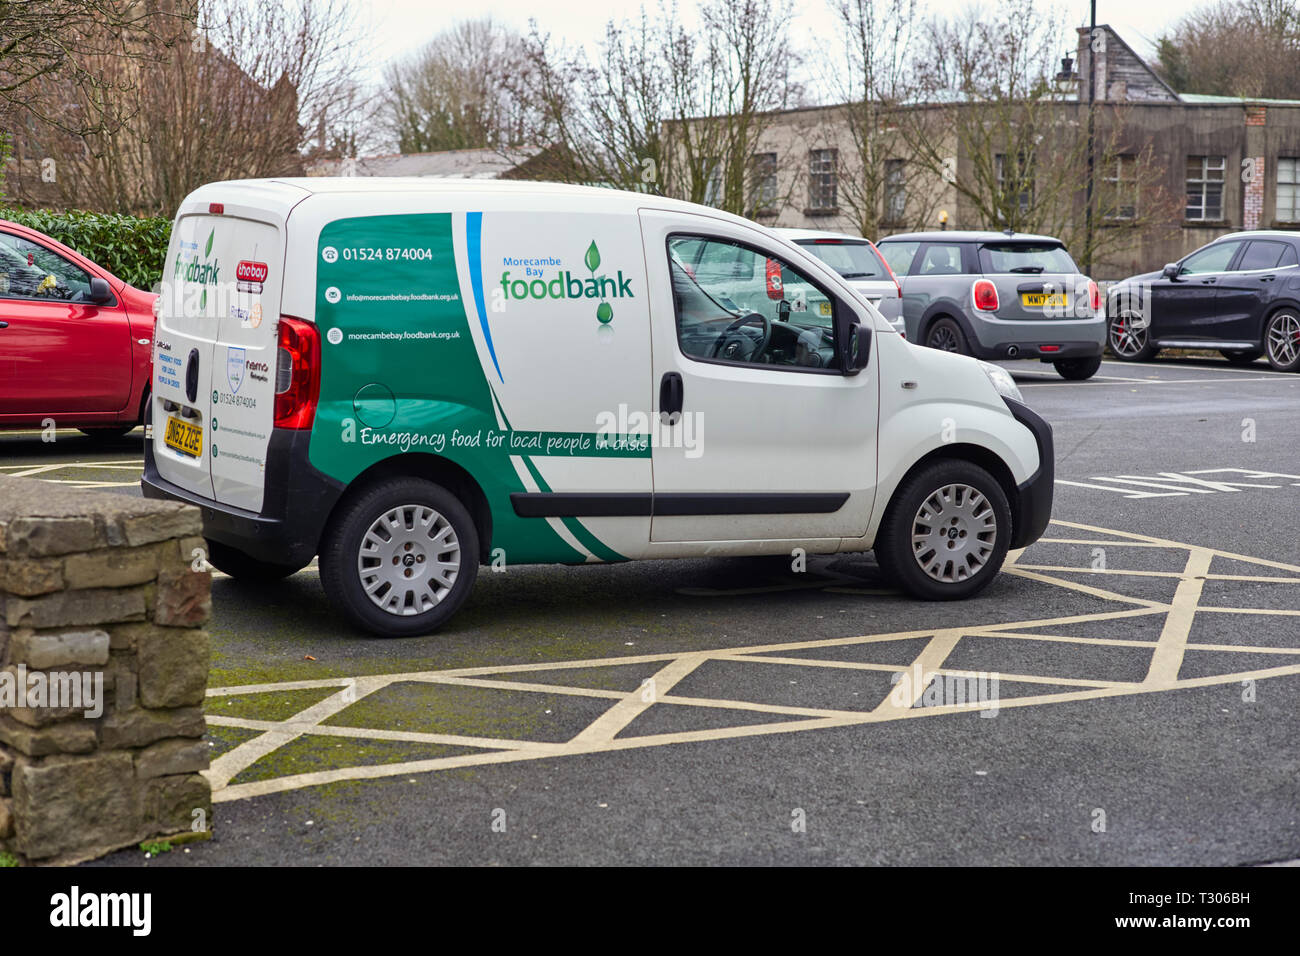 Morecambe Bay foodbank delivery van for emergency food for local people in crisis Stock Photo